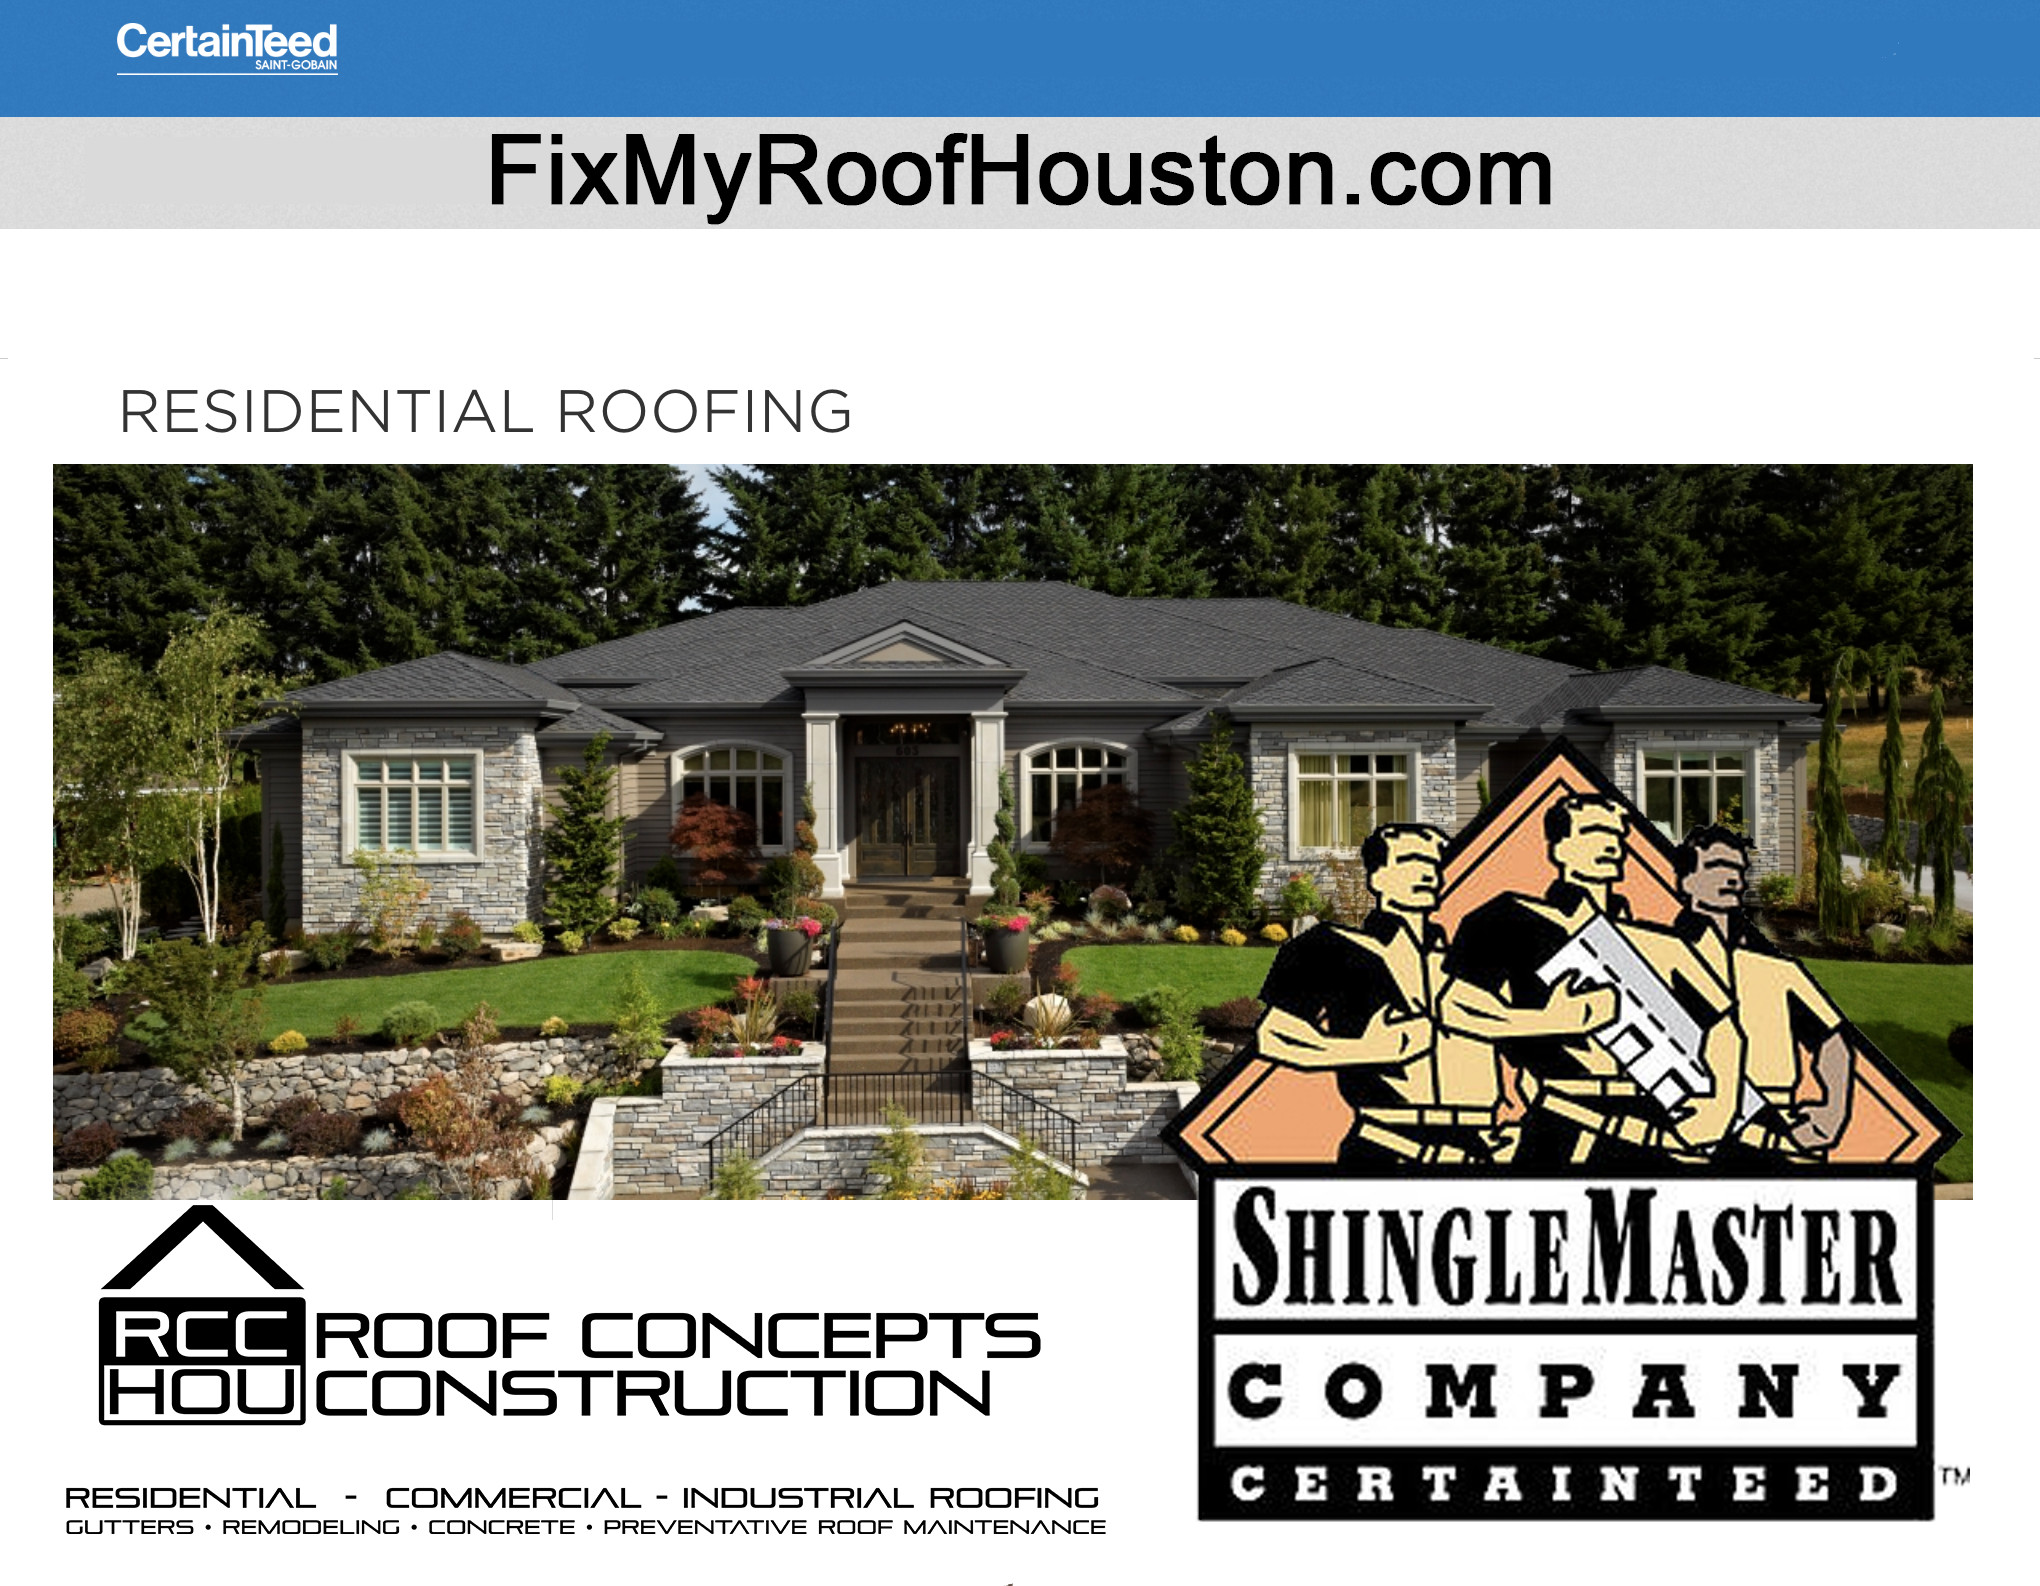 Types of Shingles - RCC Houston Offers - Certainteed Shingle Master Roofing Company